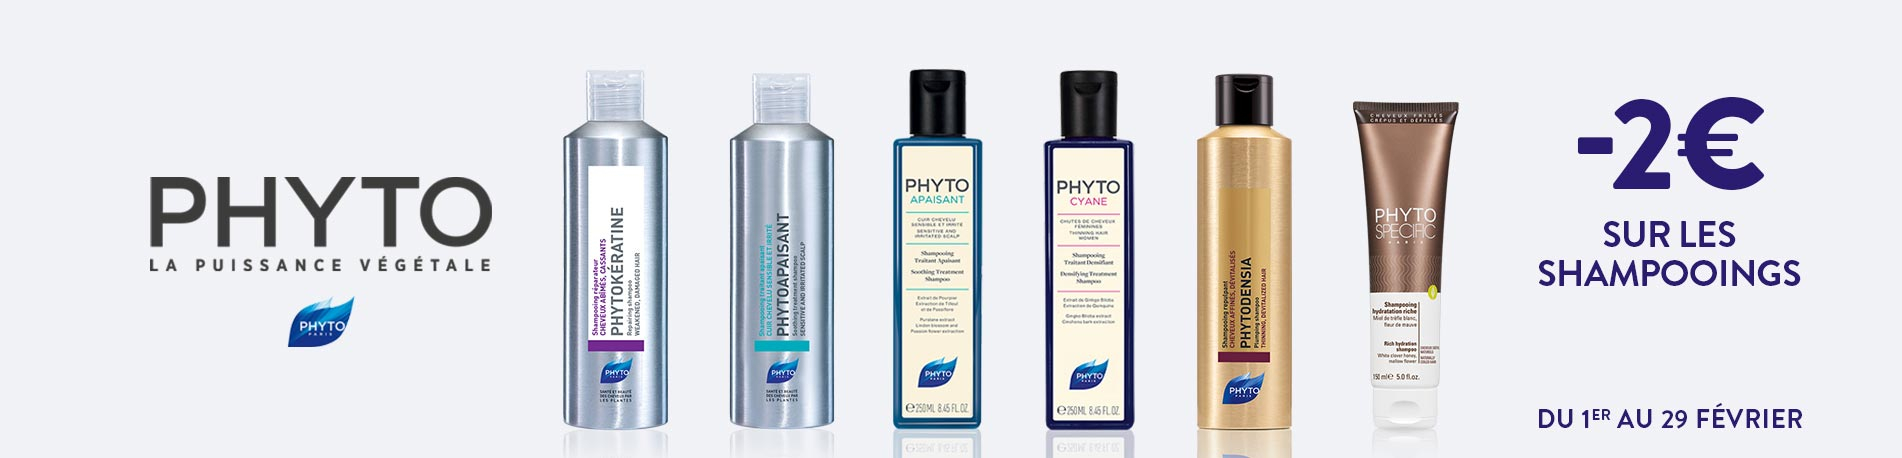 Promotion Phyto shampooings